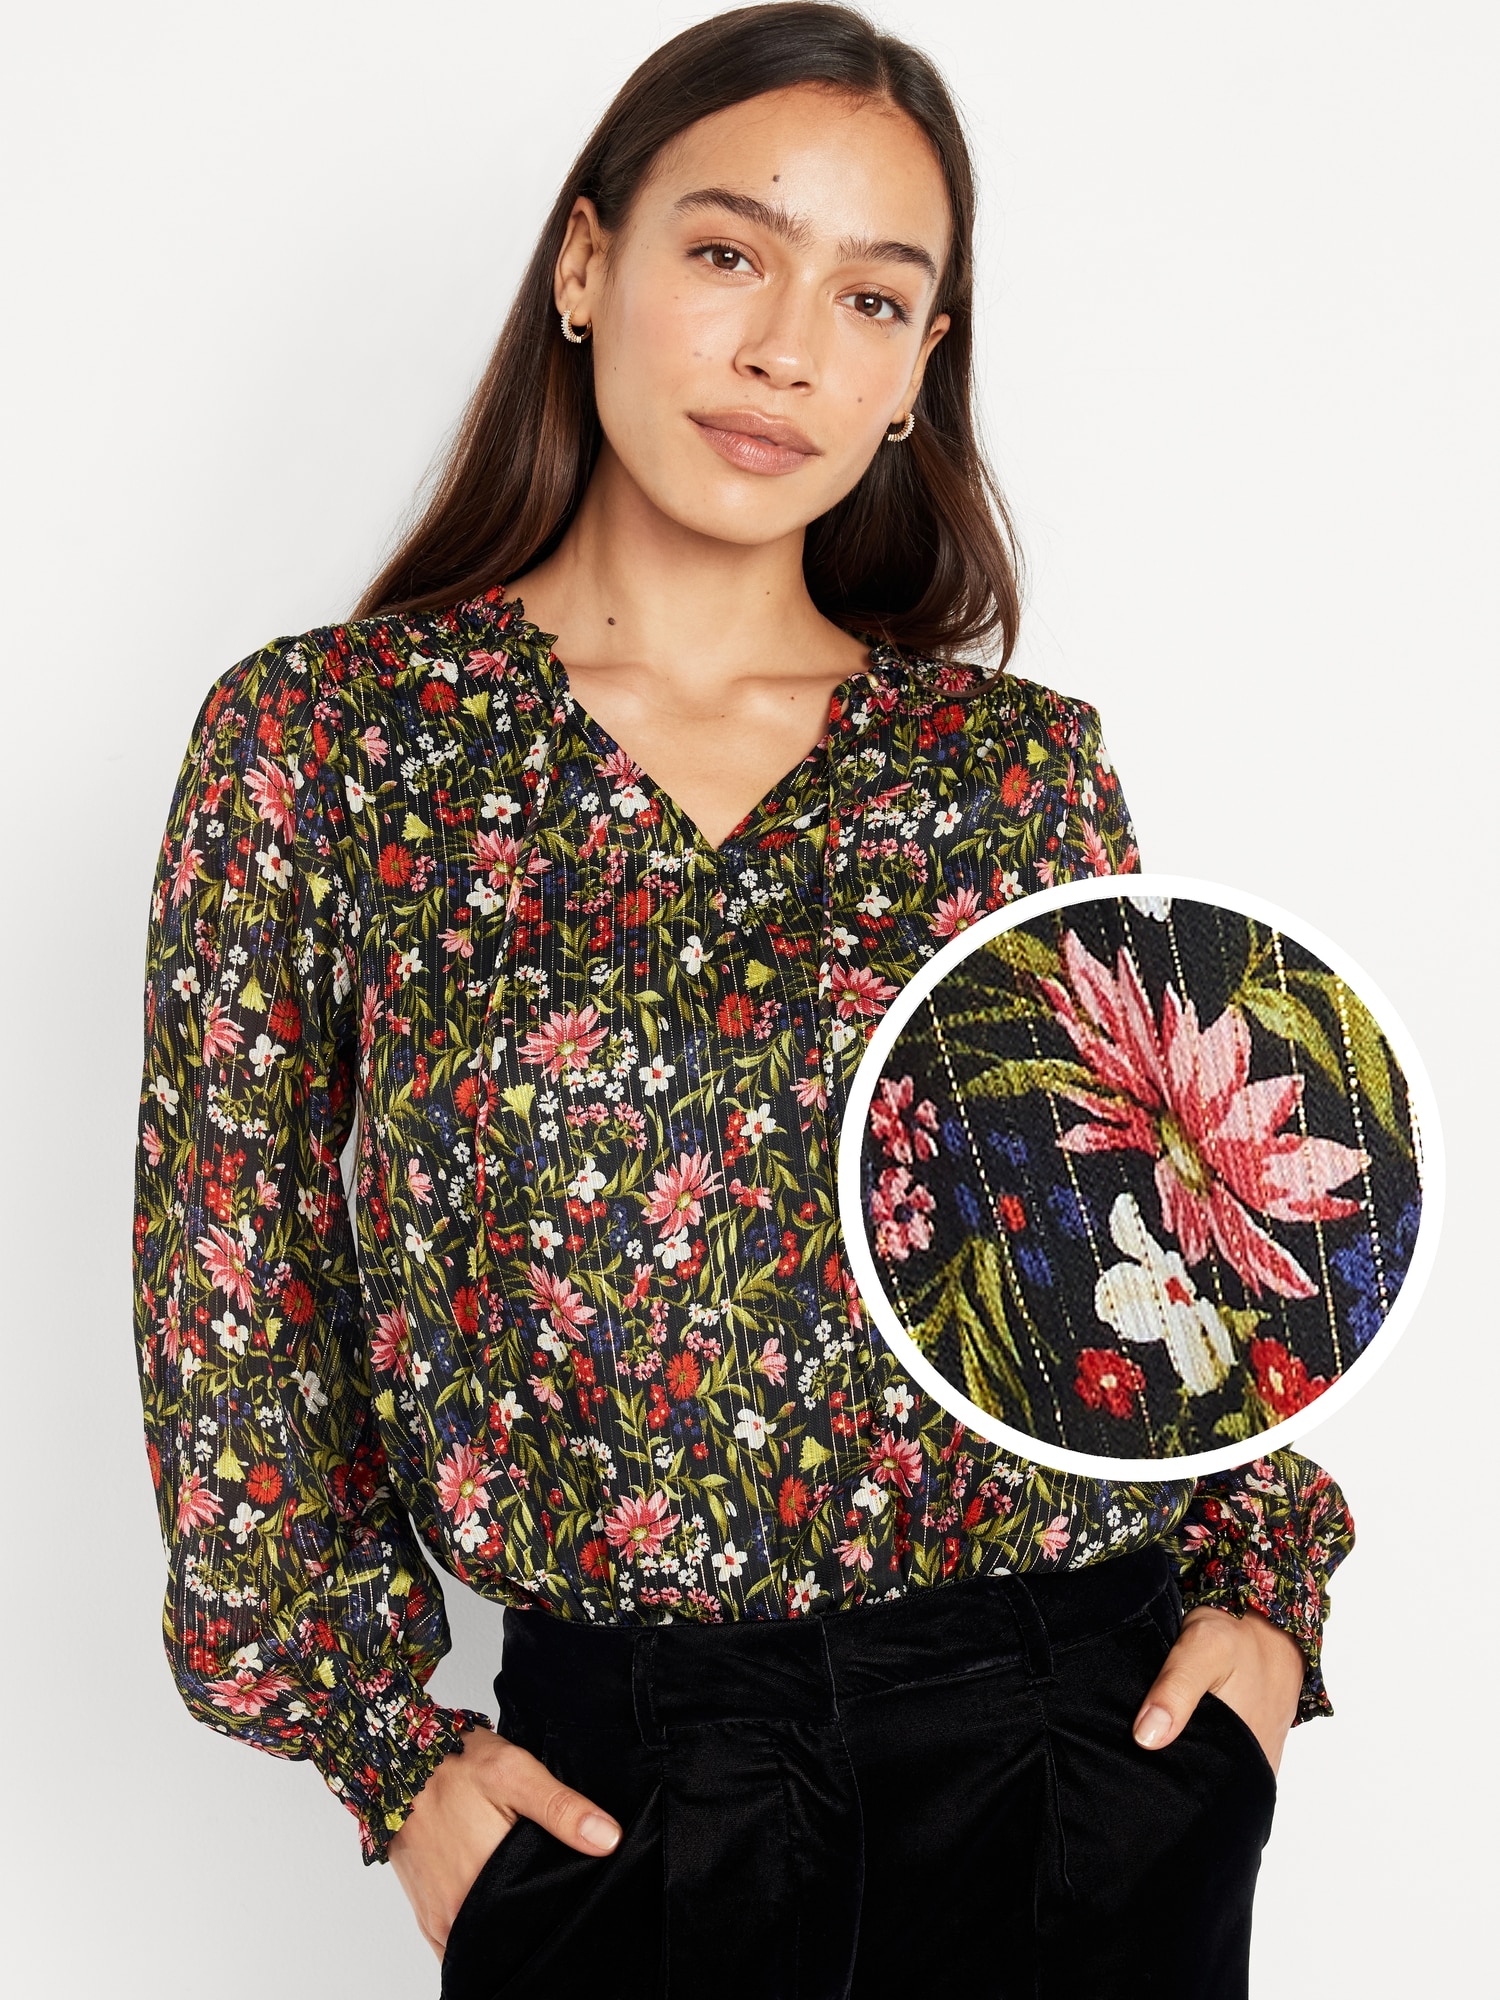 Floral Tops